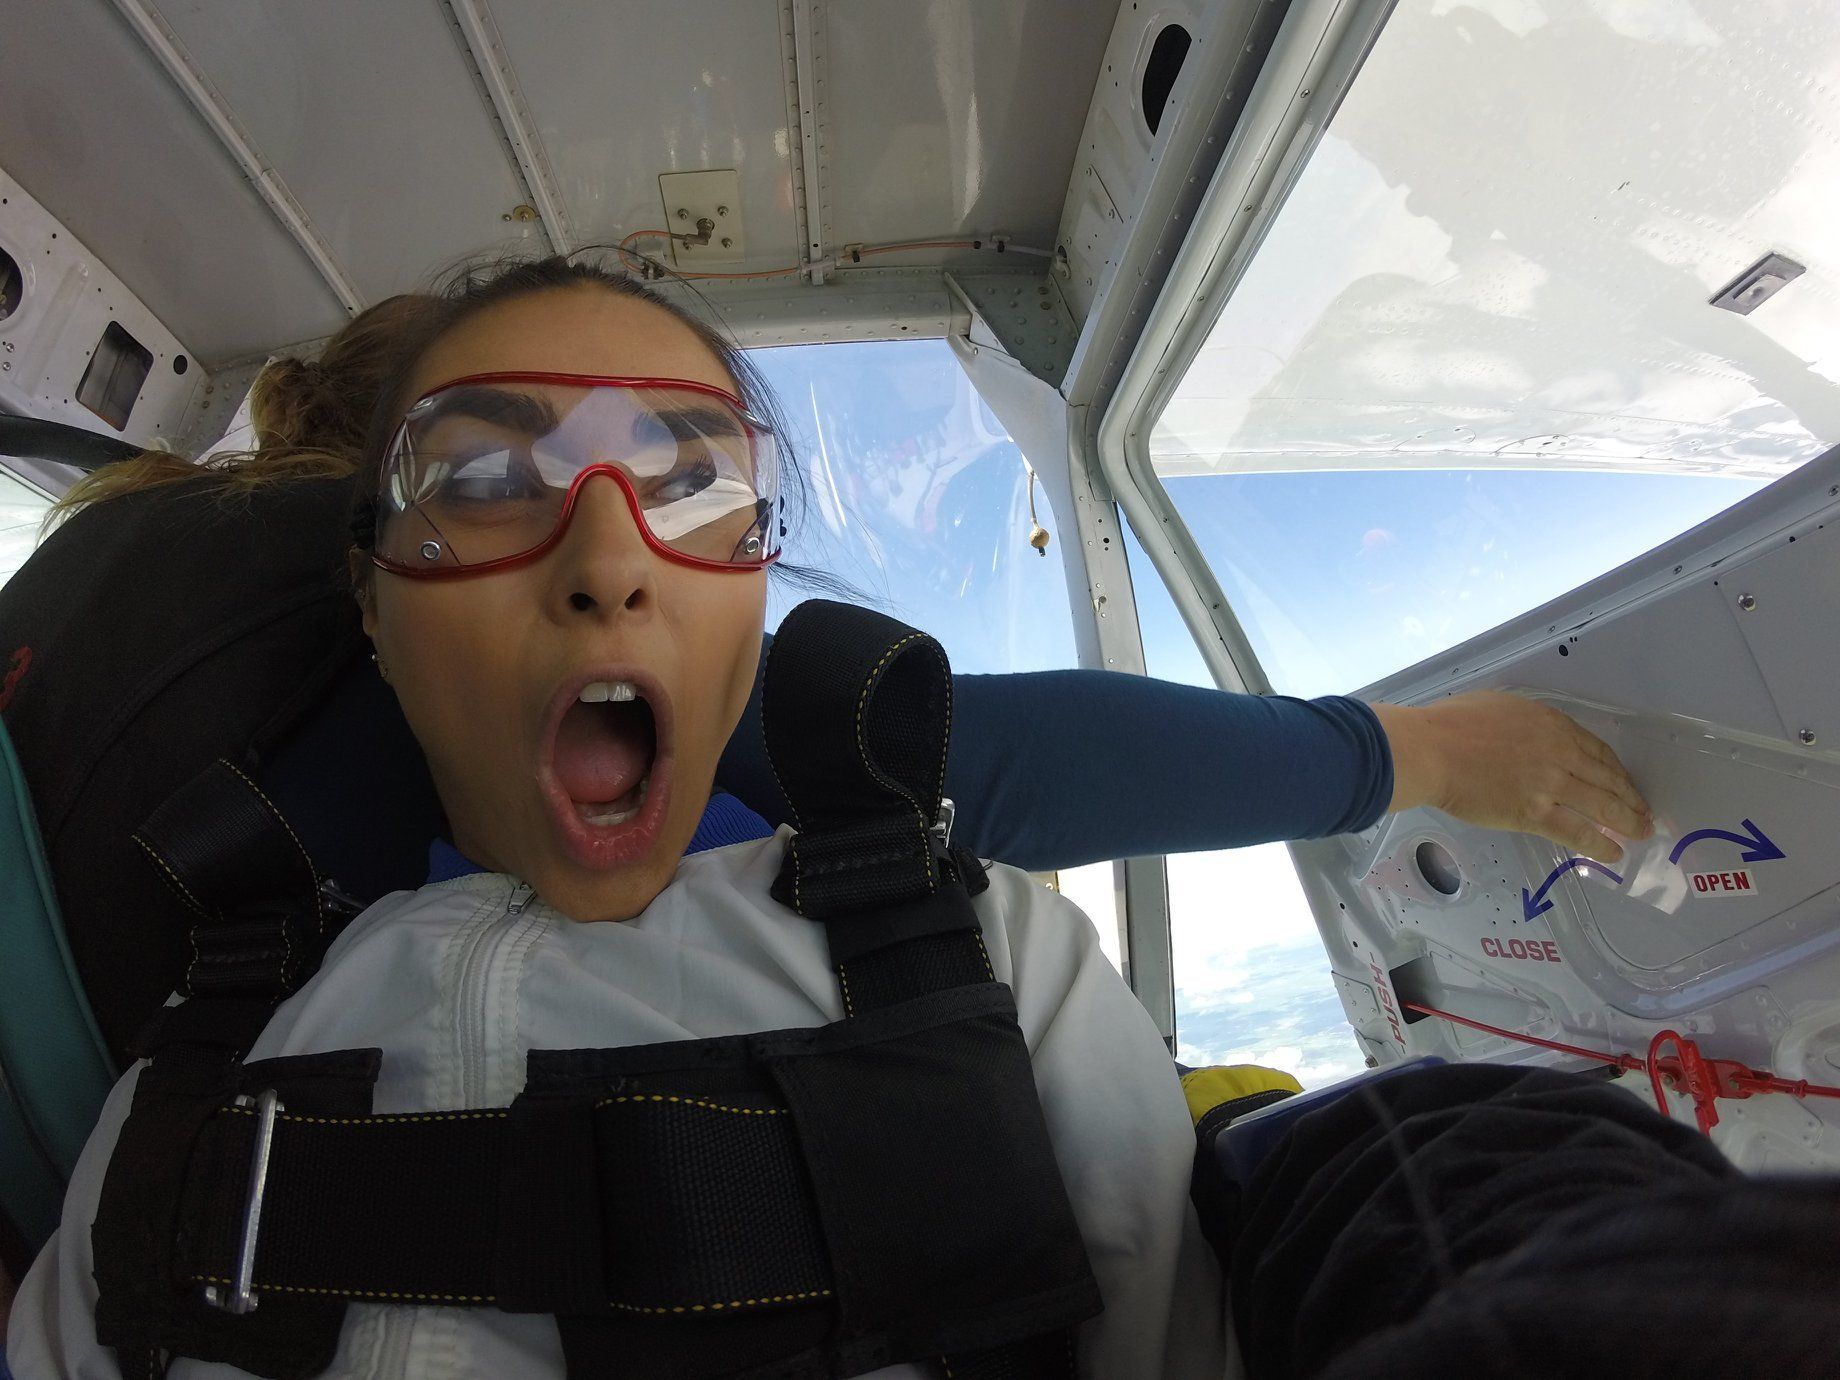 My First Skydive